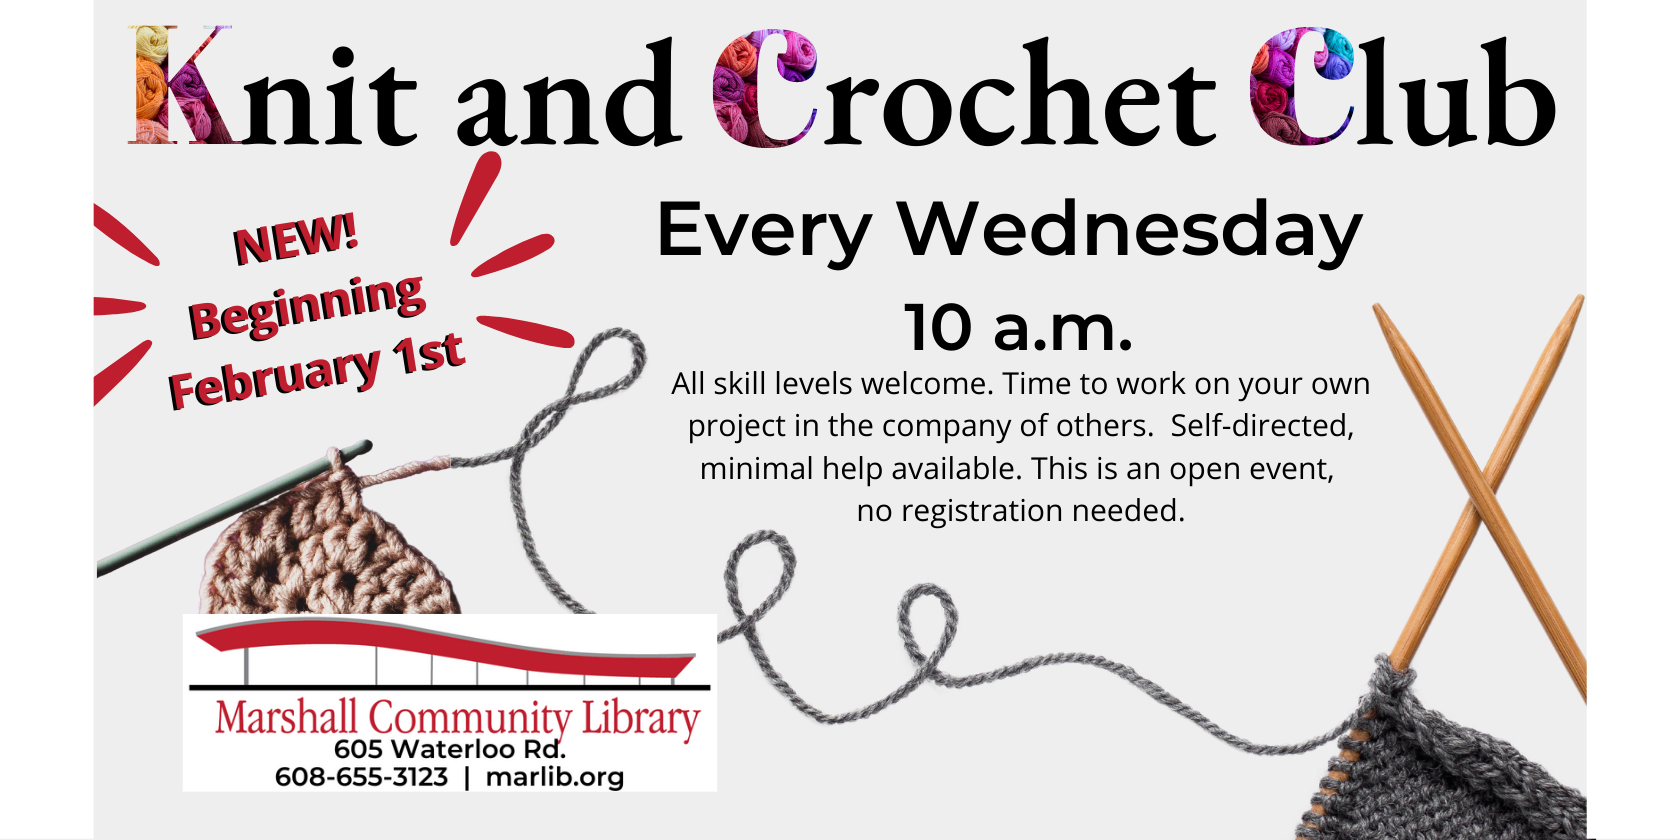 Every Wednesday at 10 am Knit and Crochet Club